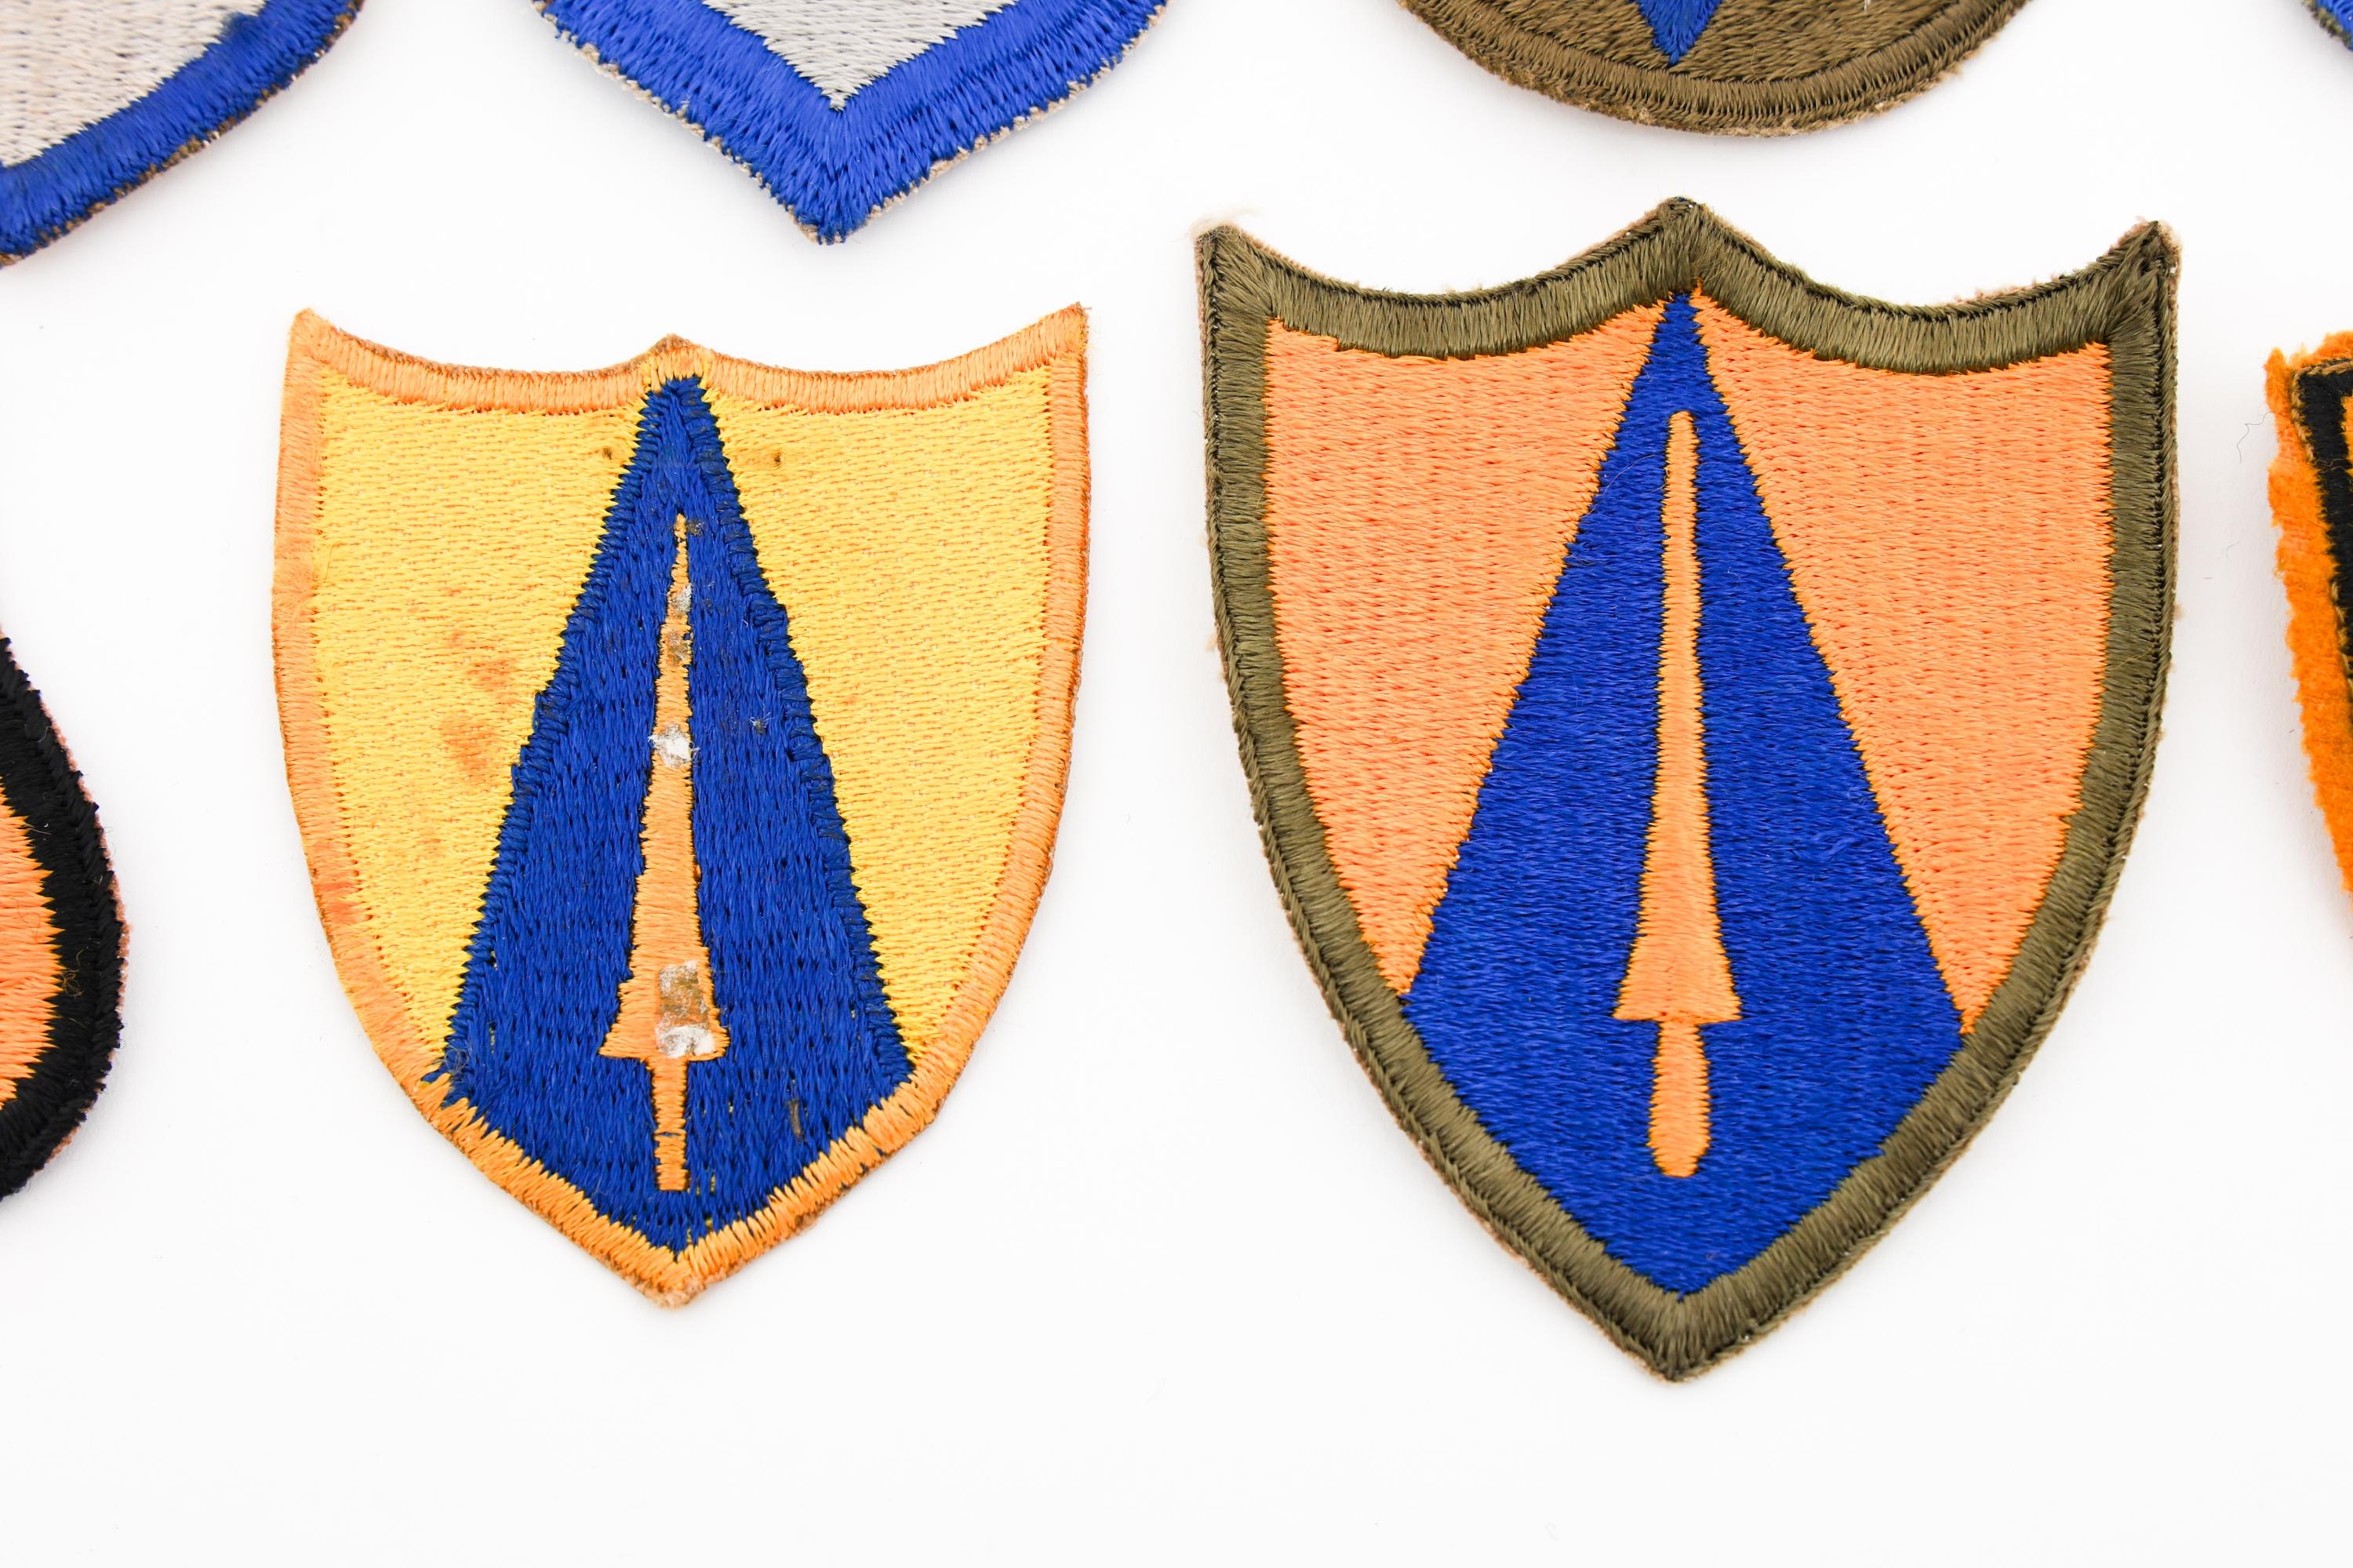 WWII - POST WAR US ARMY CAVALRY DIVISION PATCHES